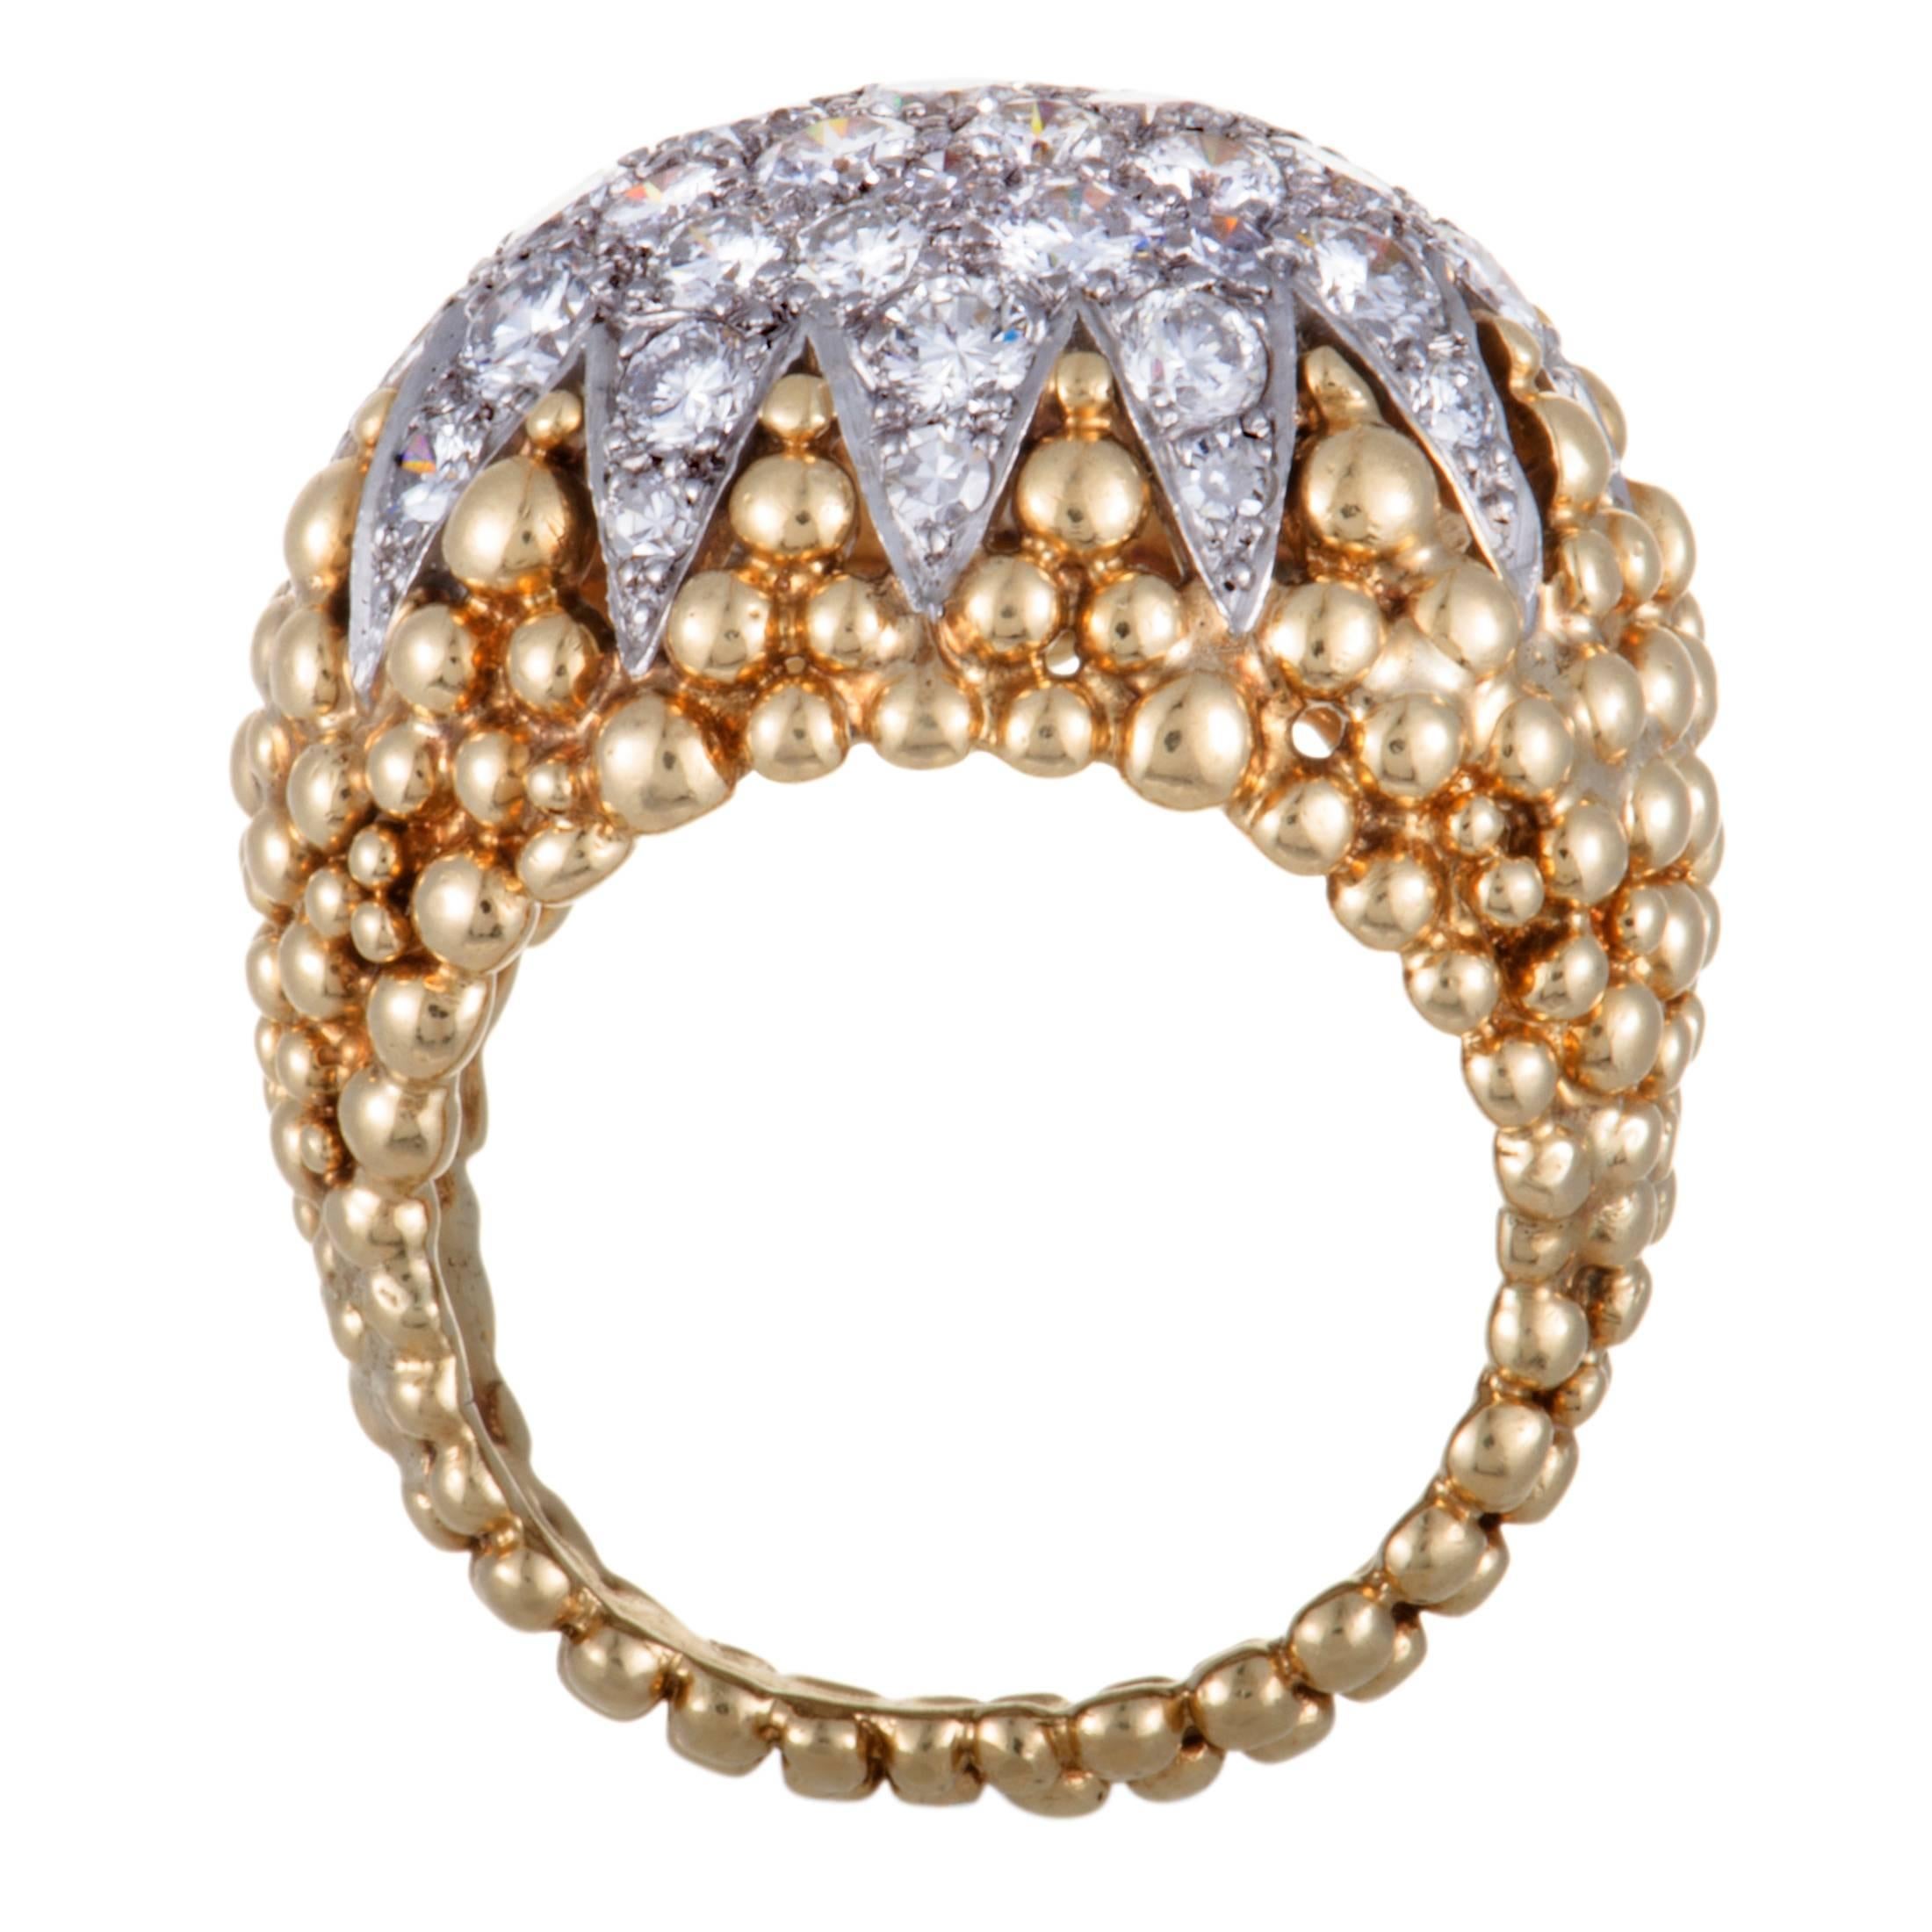 If you wish to accentuate your look with a jewelry piece that exudes luxurious prestige and refined extravagance then this fabulous David Webb ring is a perfect choice. The ring is made of 18K yellow and platinum and it is expertly set with